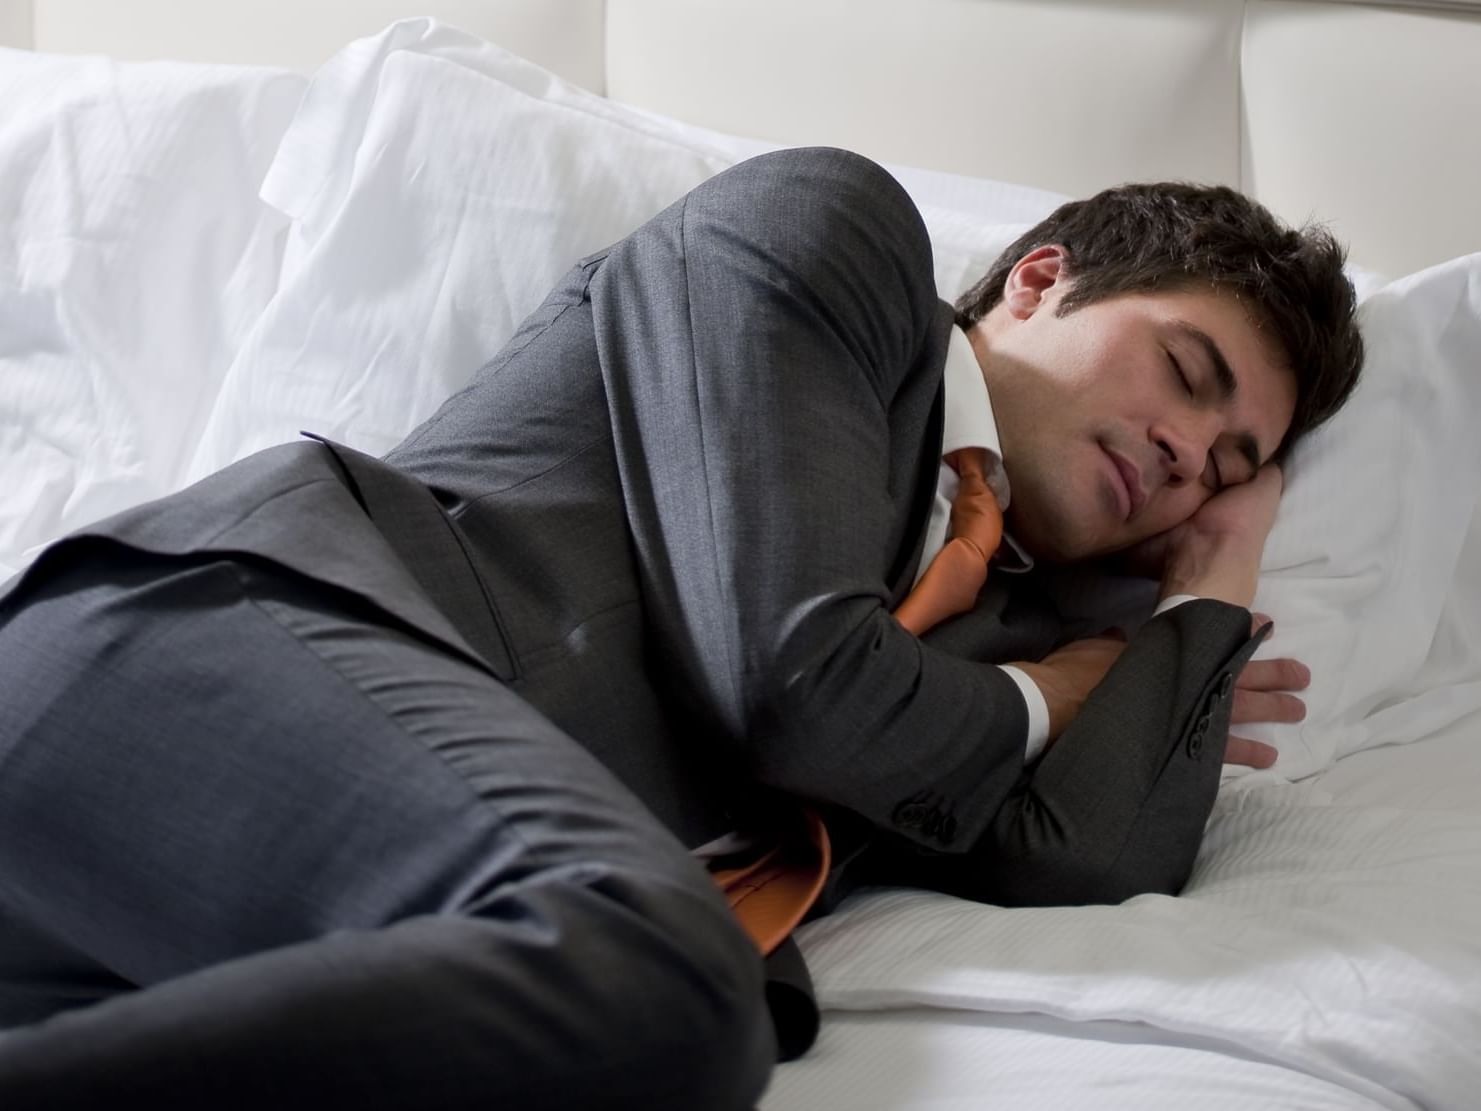 Man sleeping with a suit